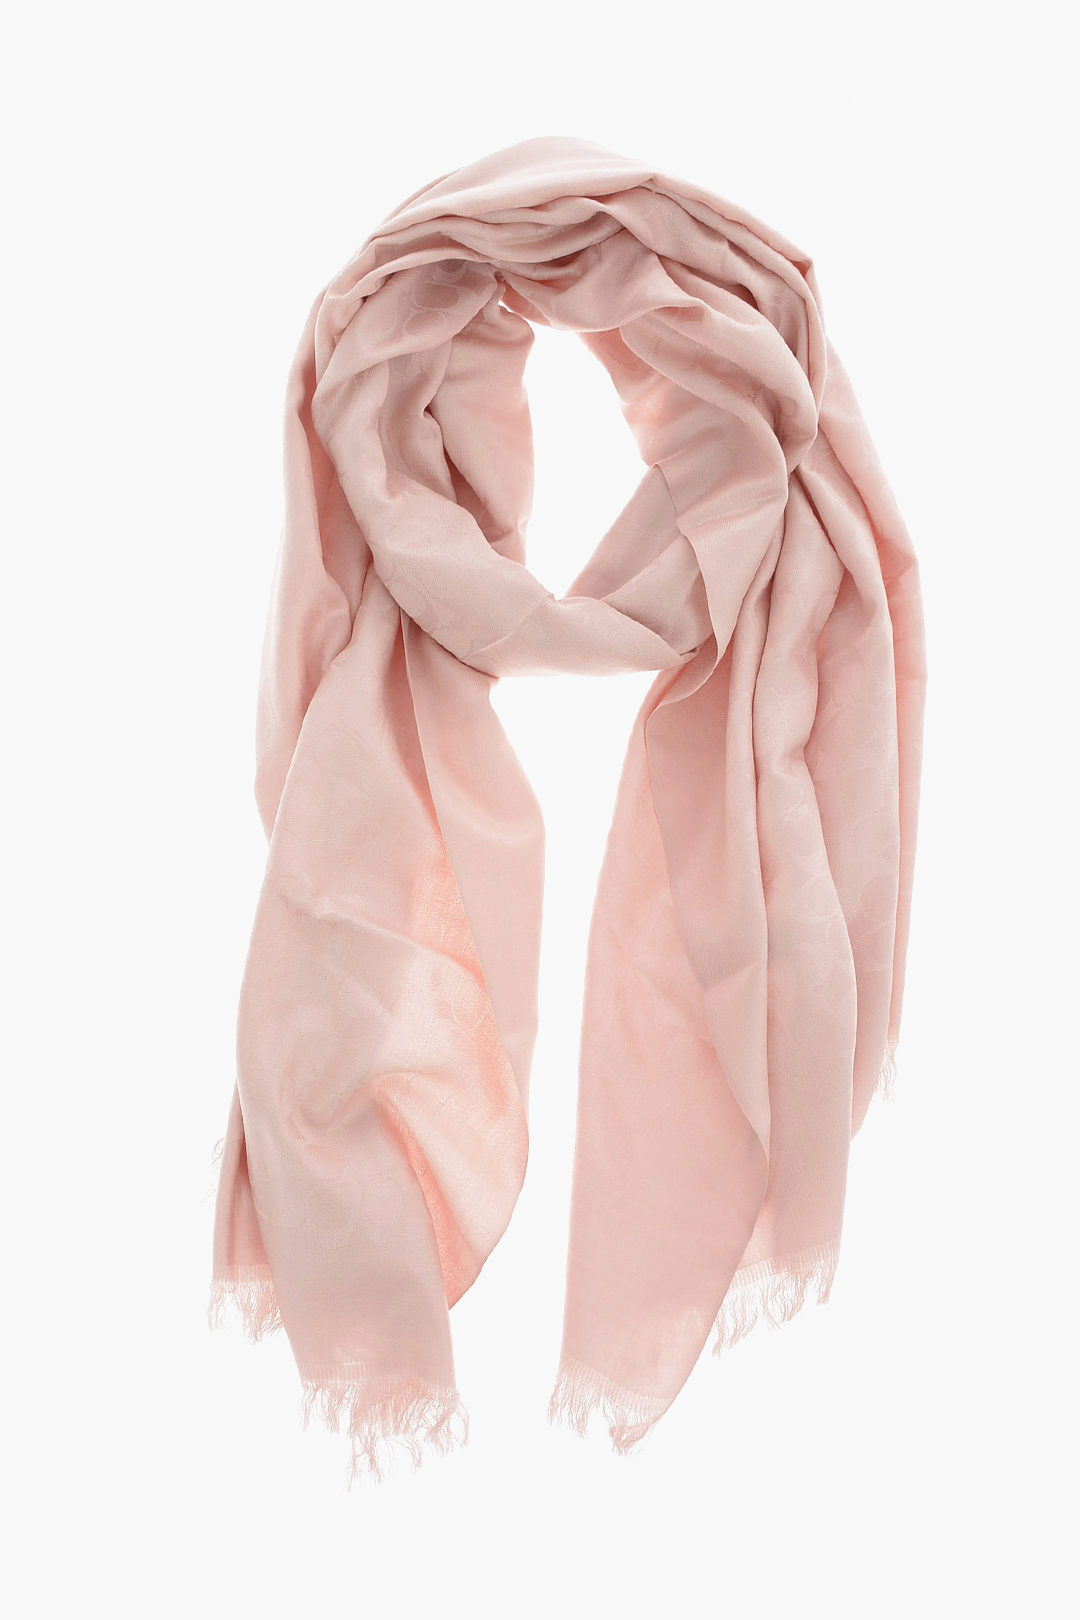 Coach embroidered C Scarf women - Glamood Outlet